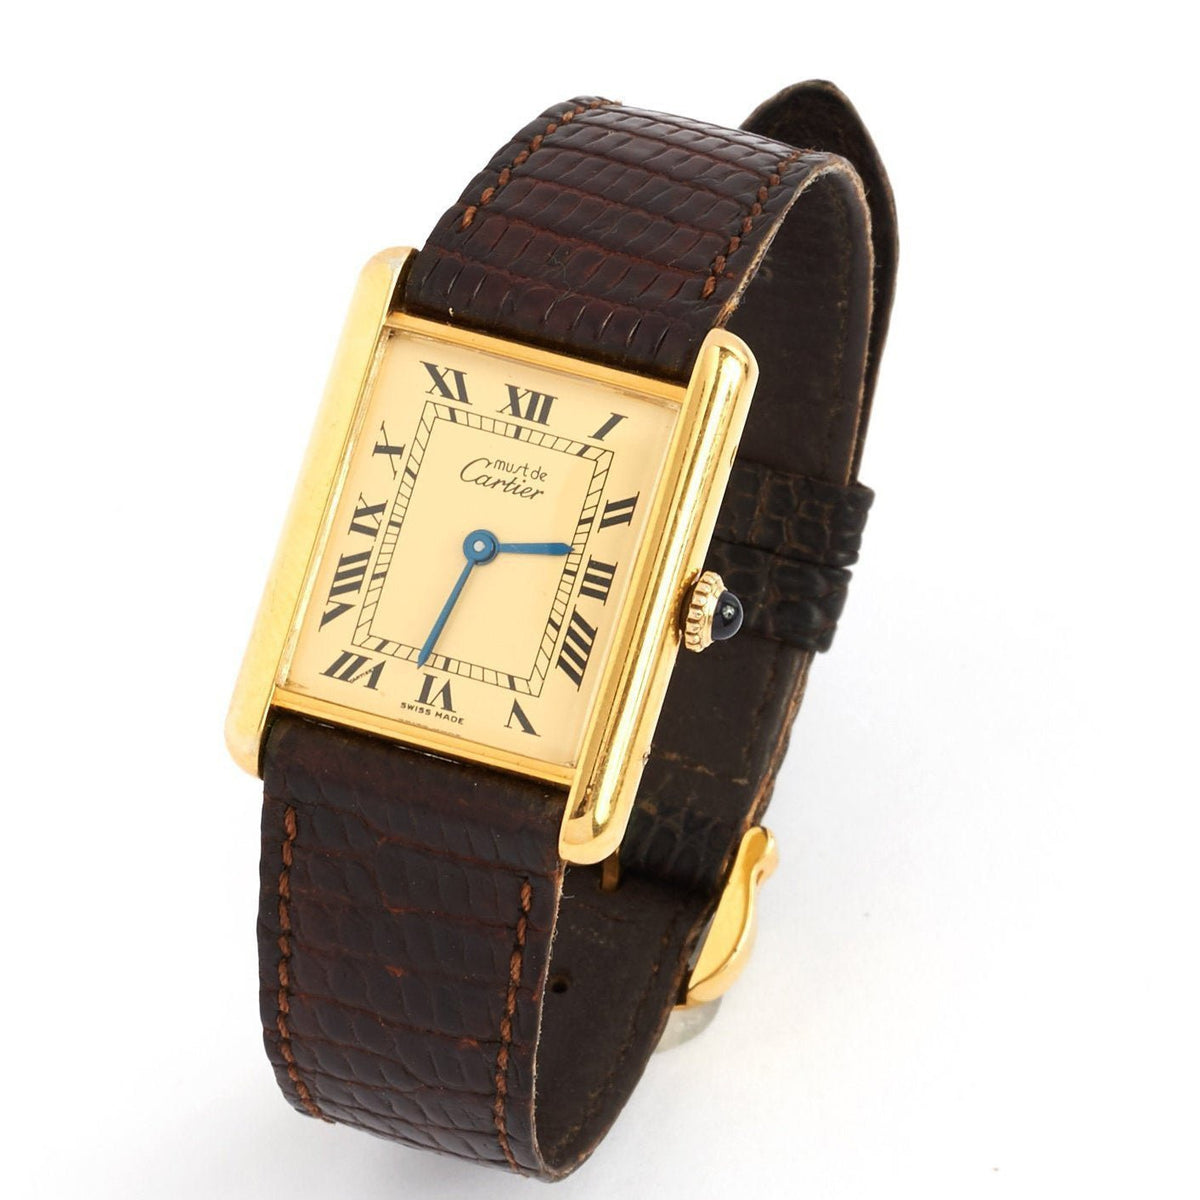 Jackie Kennedy's Watch - Former First Lady's Cartier Tank Watch for Sale